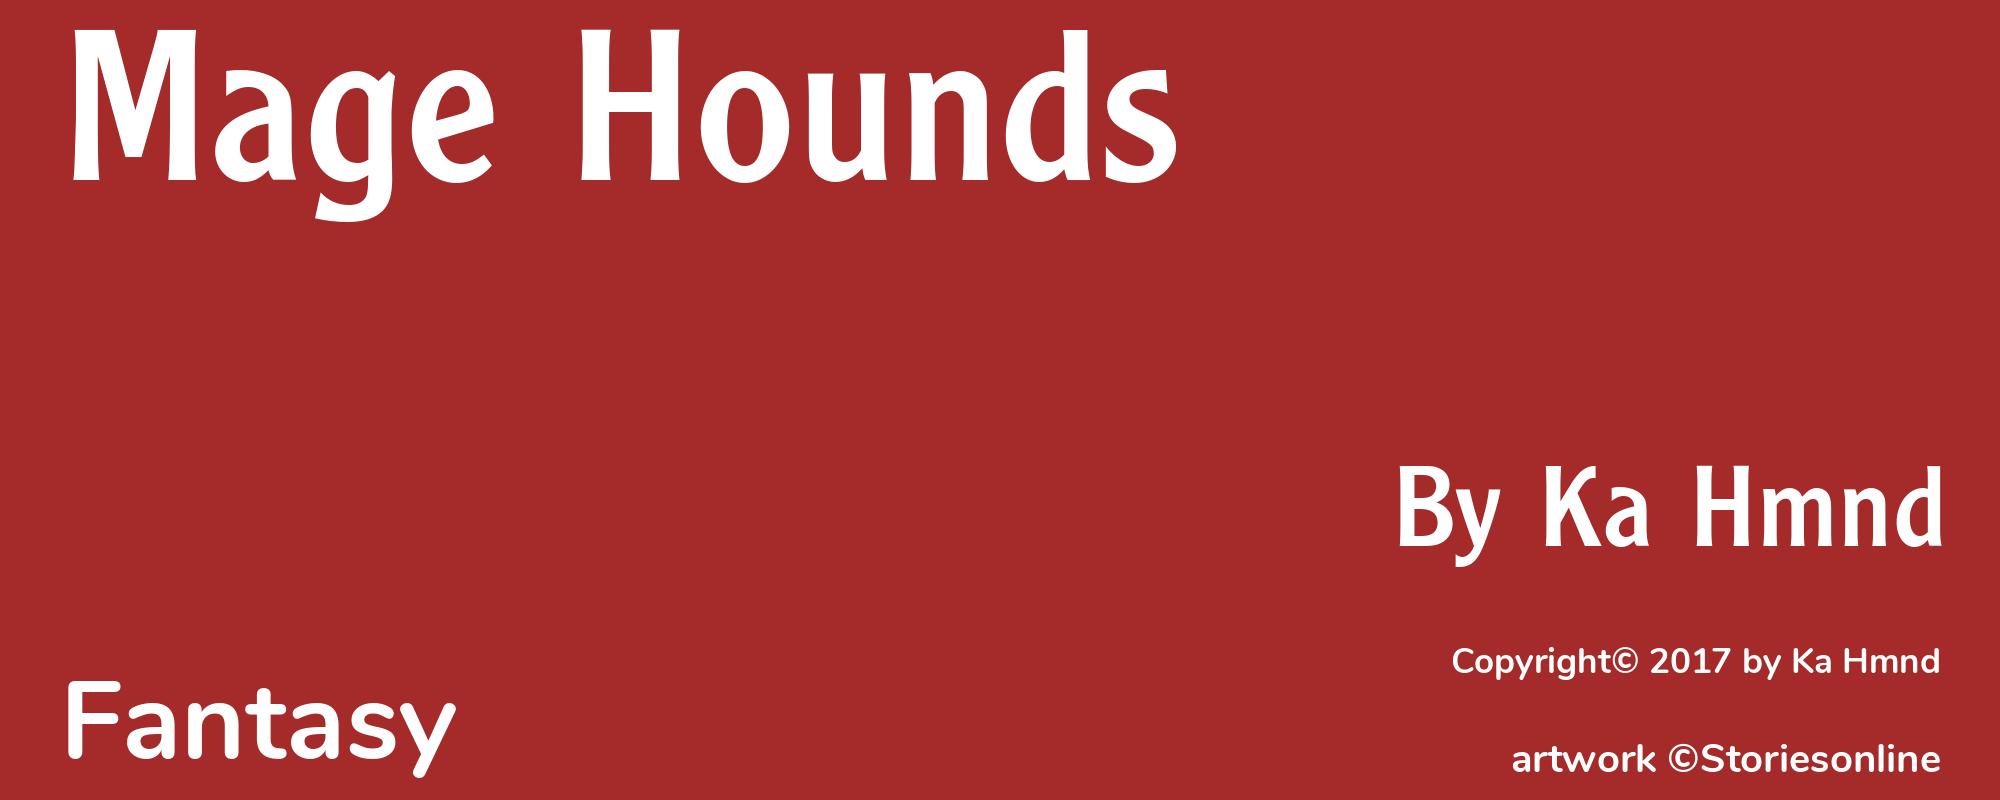 Mage Hounds - Cover